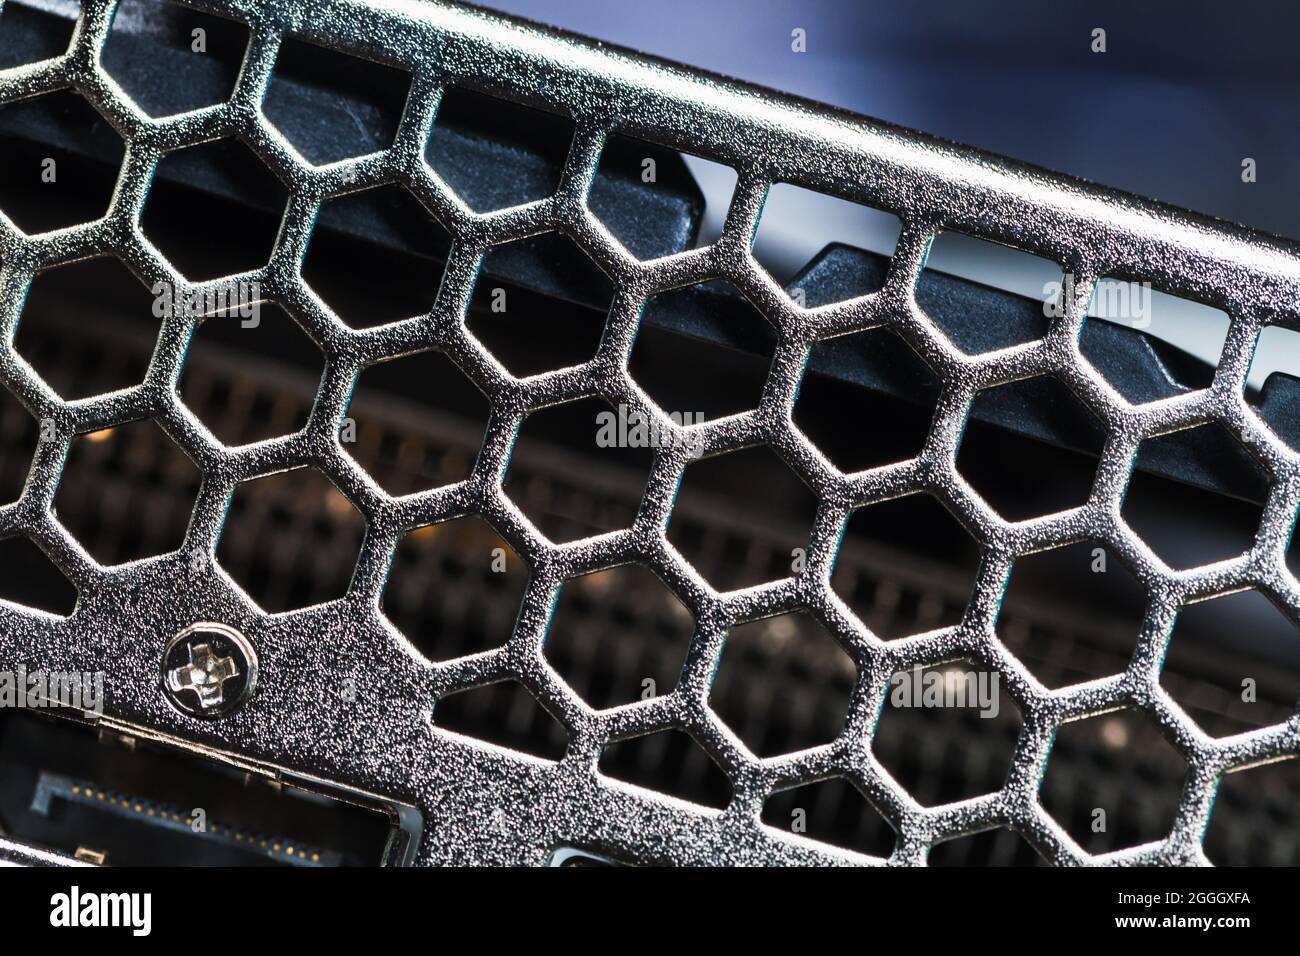 New shiny black PC ventilation grille, abstract close-up photo with selective focus Stock Photo